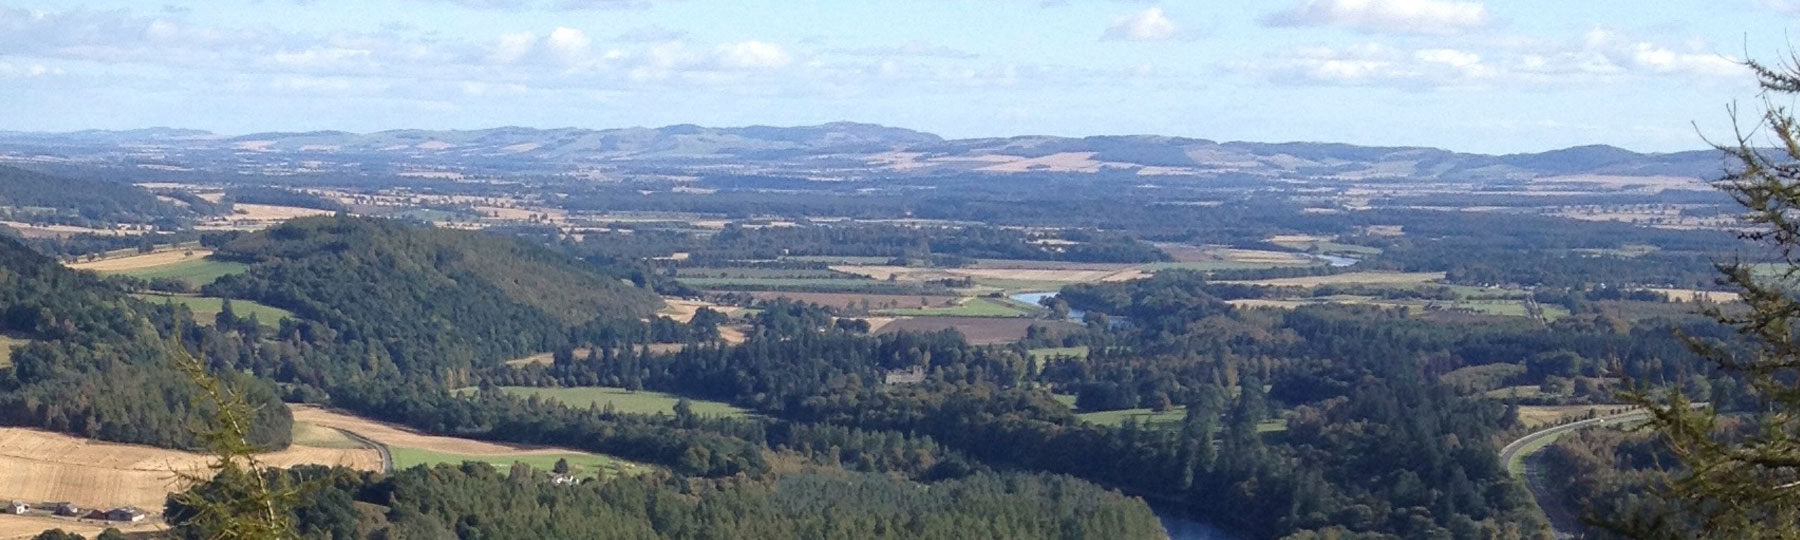 Murthly esate, nestled in the highland hills of Perthshire.